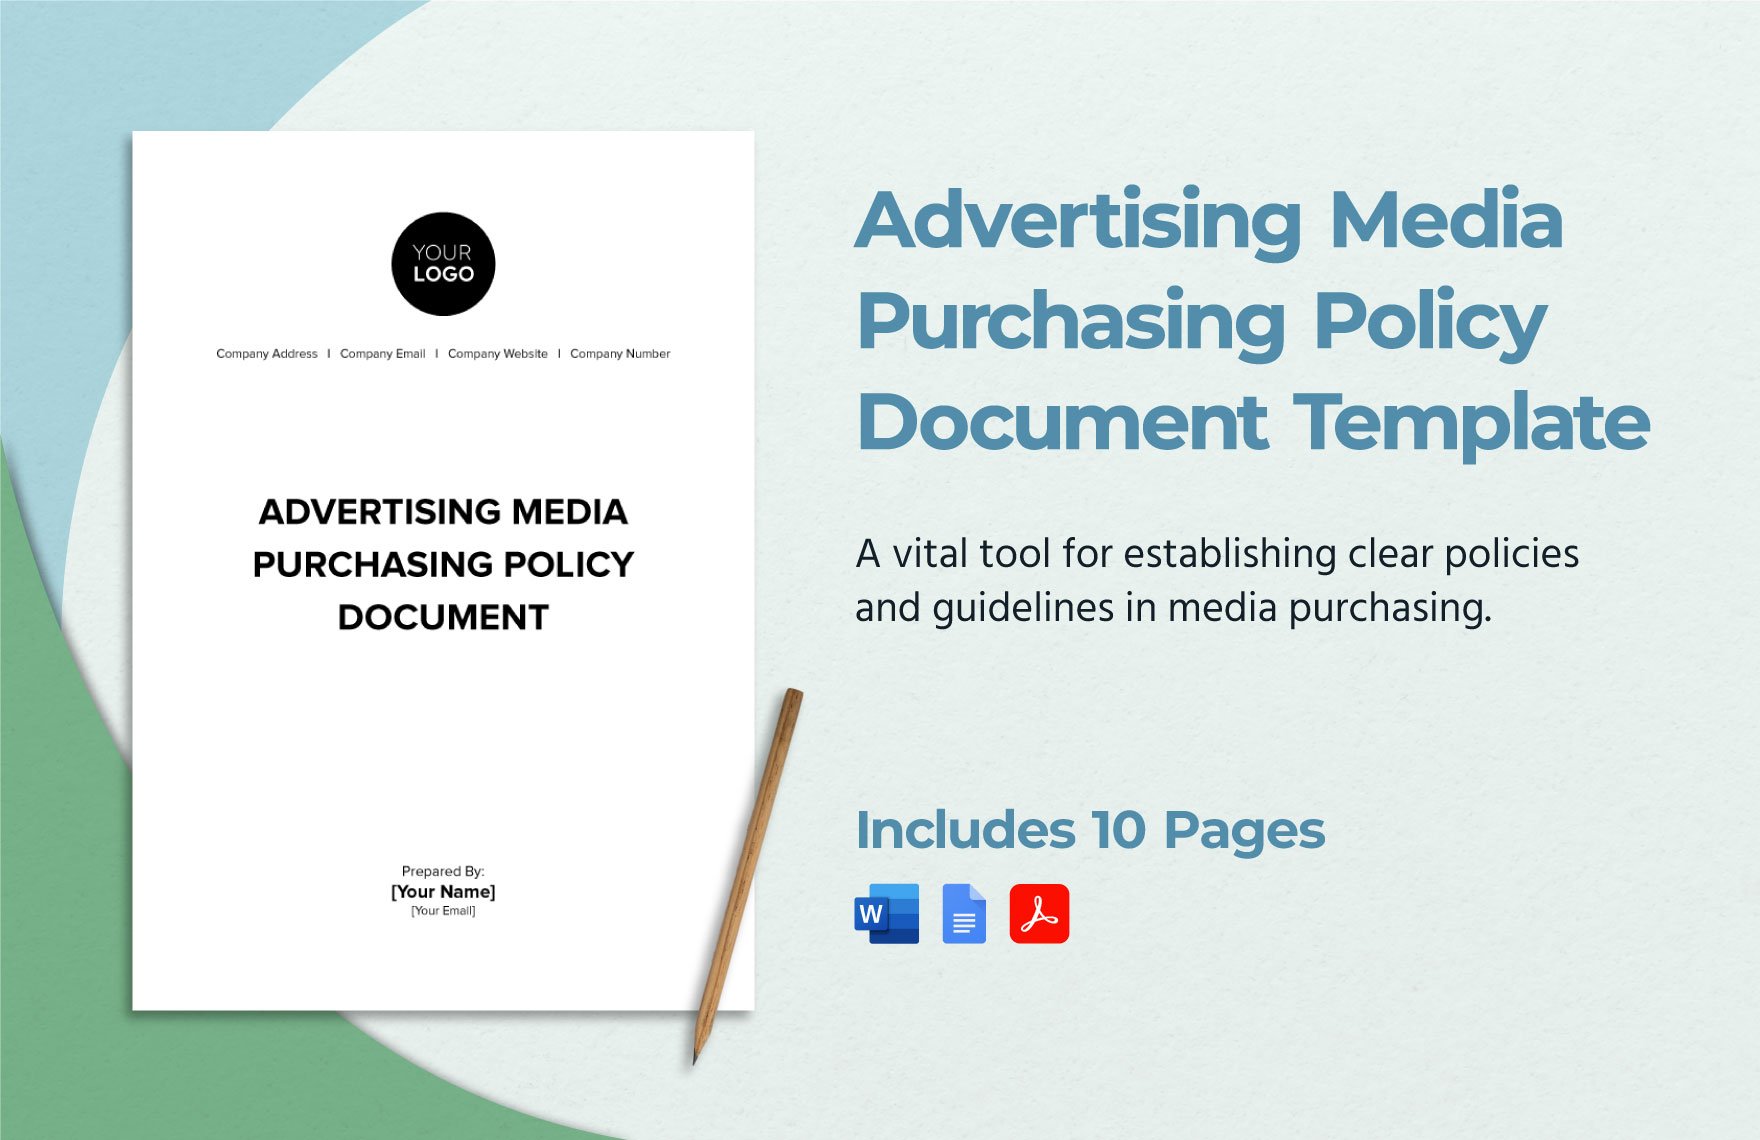 Advertising Media Purchasing Policy Document Template in Word, Google Docs, PDF